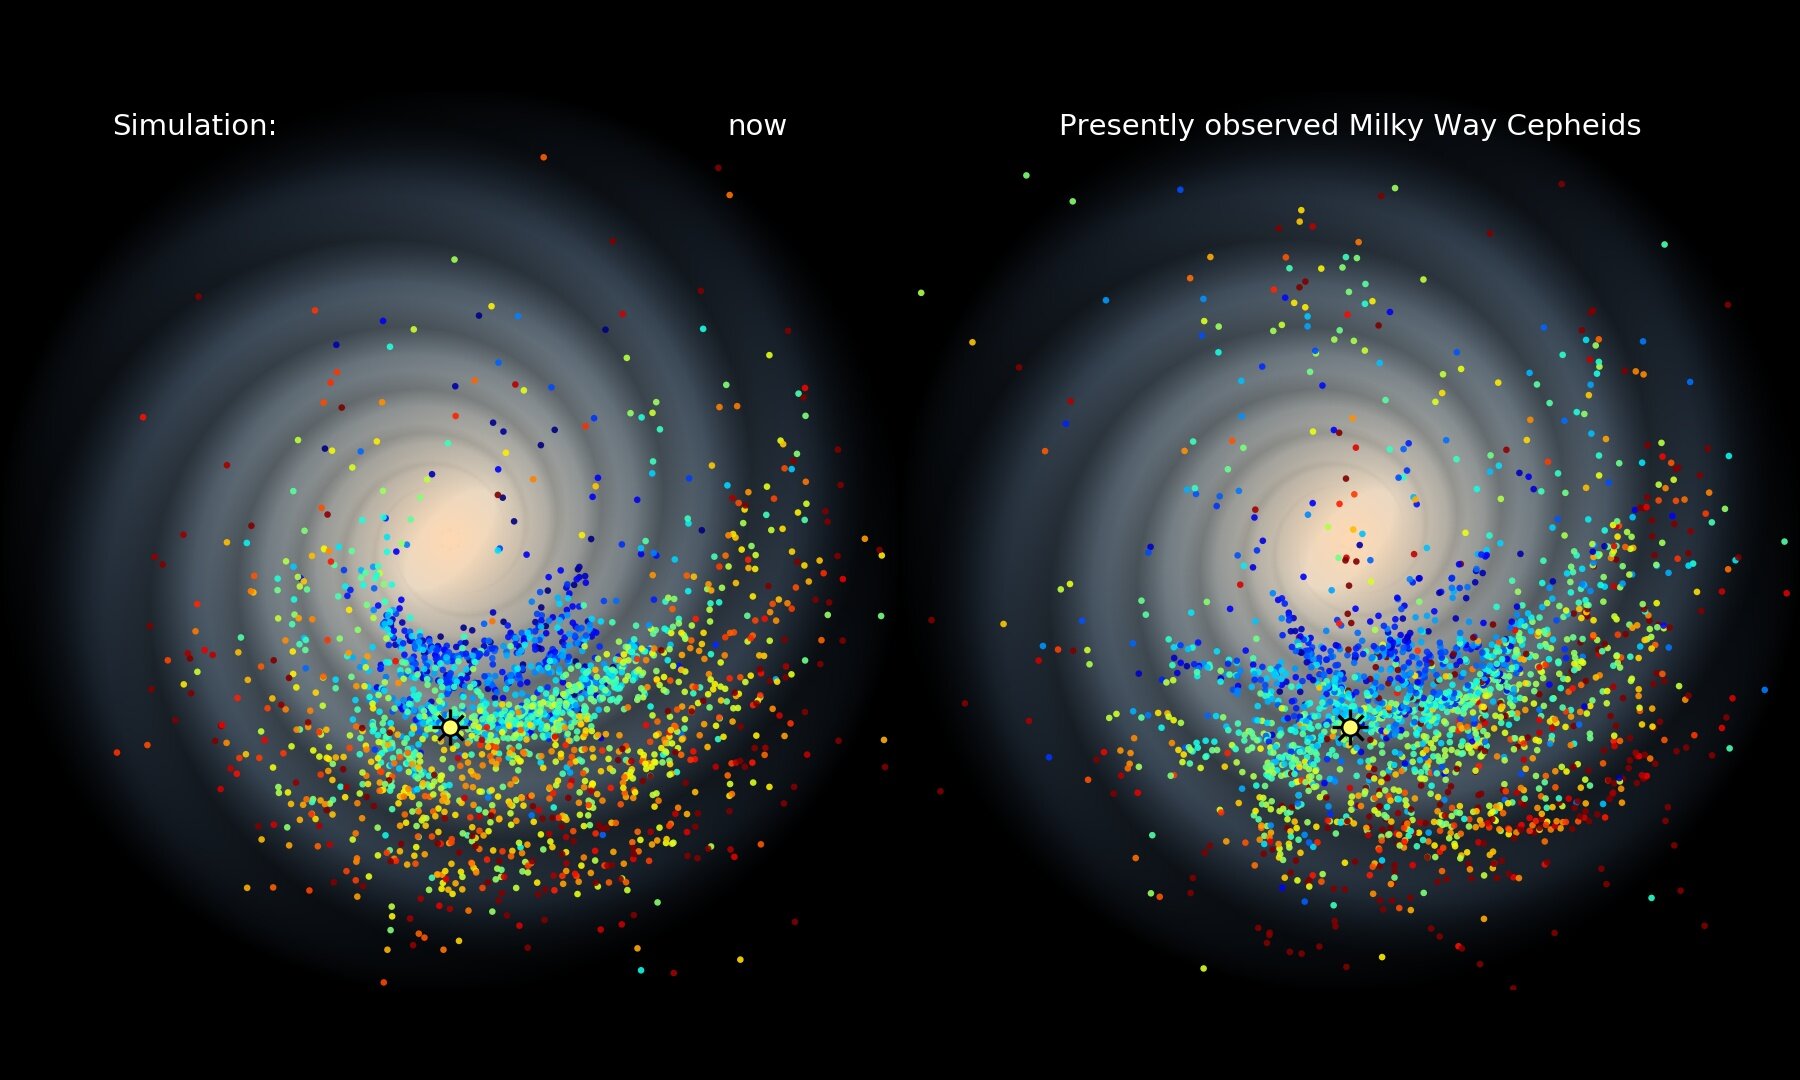 3d view of the milky way galaxy